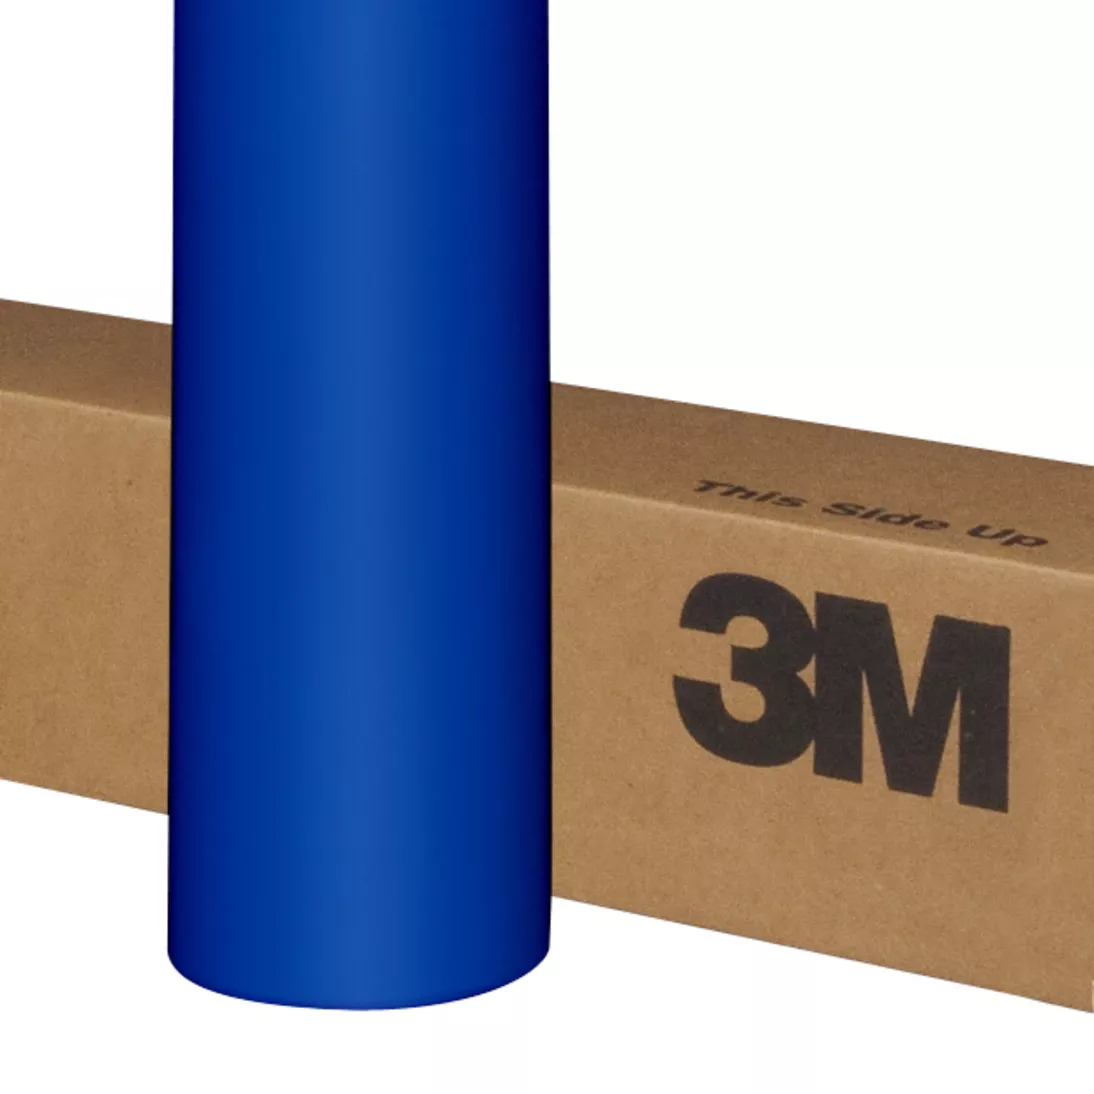 3M™ Scotchlite™ Removable Reflective Graphic Film With Comply™ Adhesive
680CR-76, Light Blue, 48 in x 50 yd, 1 Roll/Case